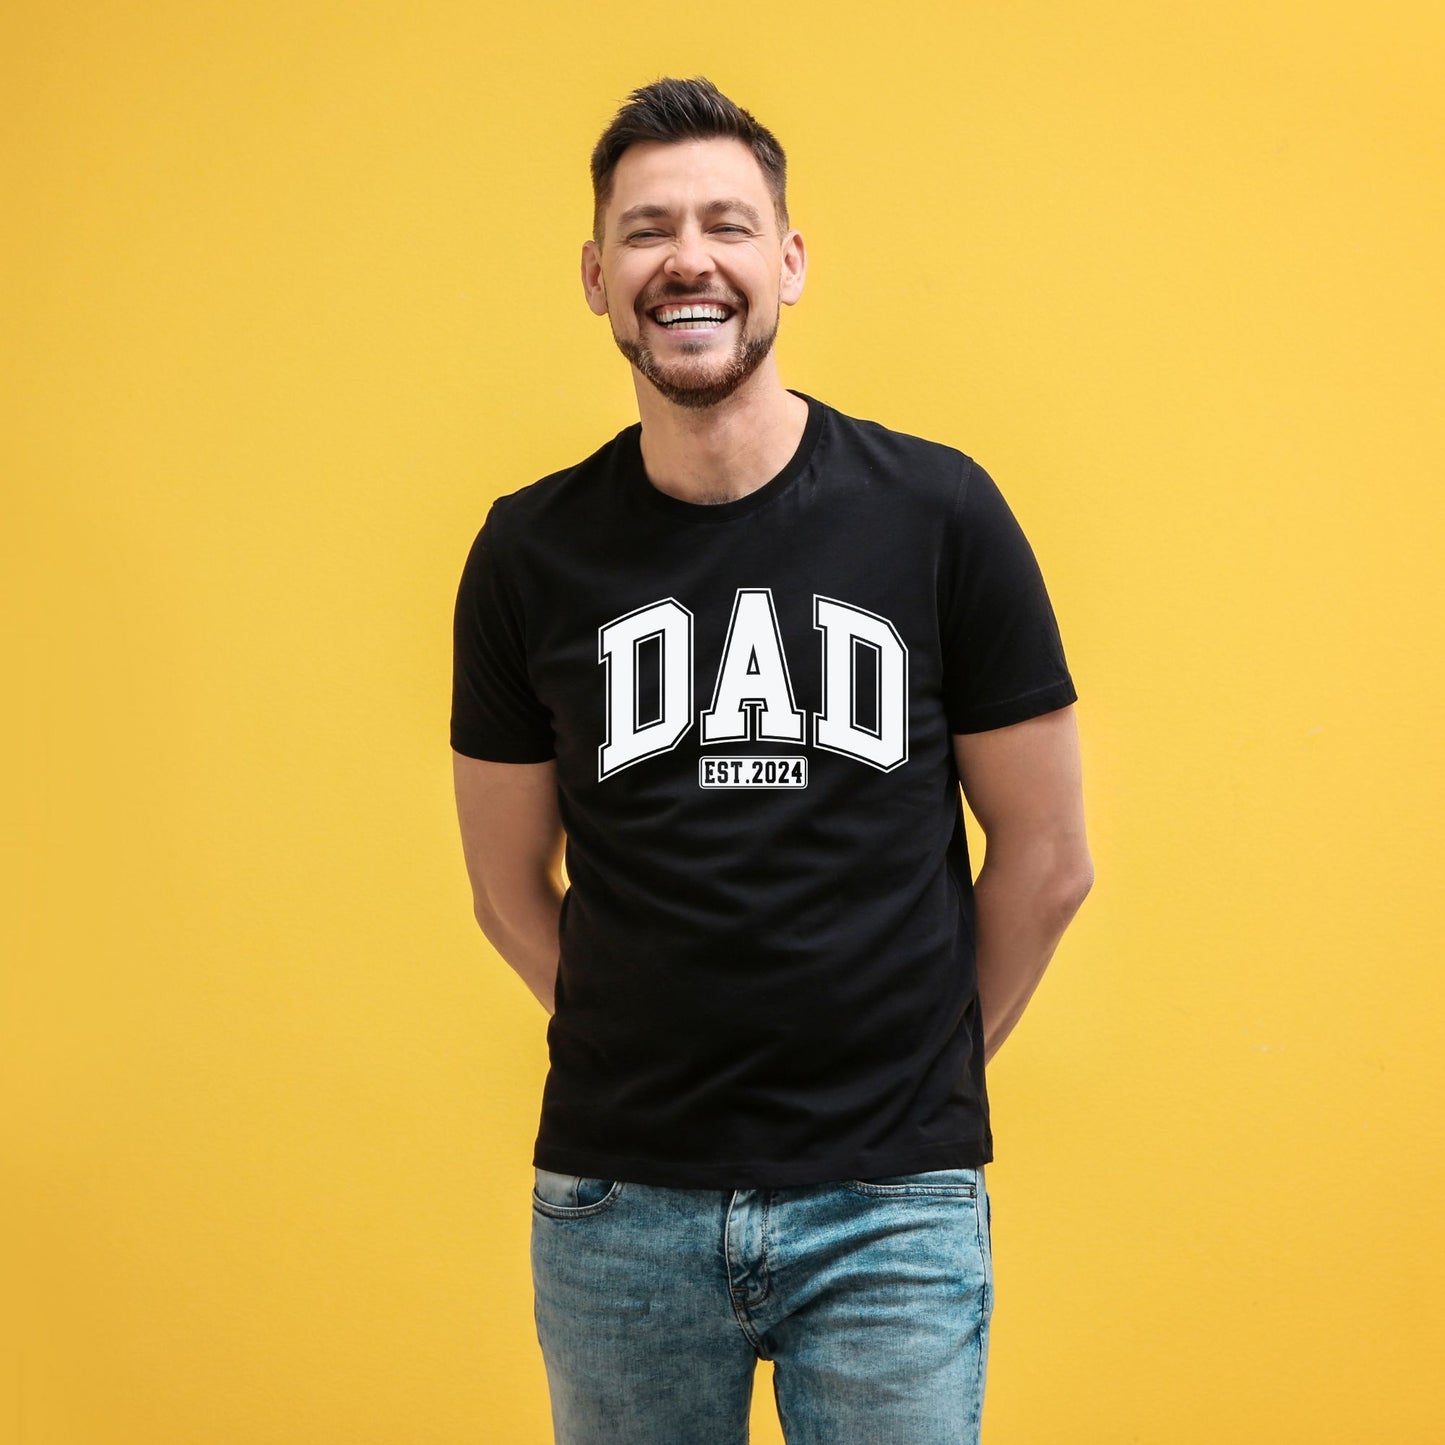 "Dad Est 2024" Short Sleeved T-Shirt for Father's Day Gift